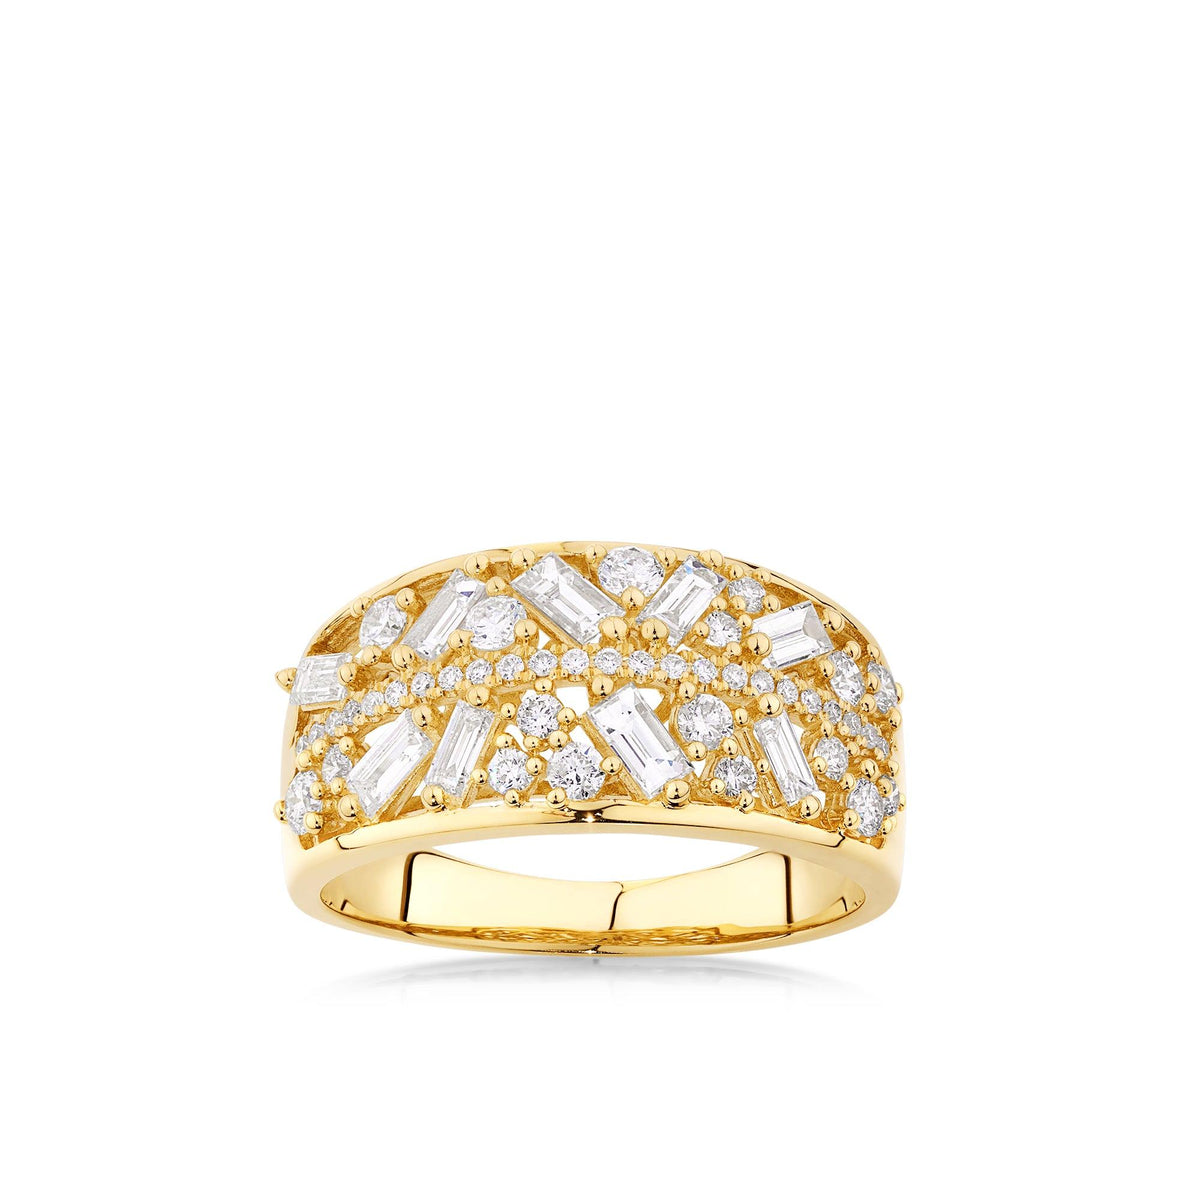 1.00ct TW Diamond Dress Ring in 9ct Yellow Gold - Wallace Bishop